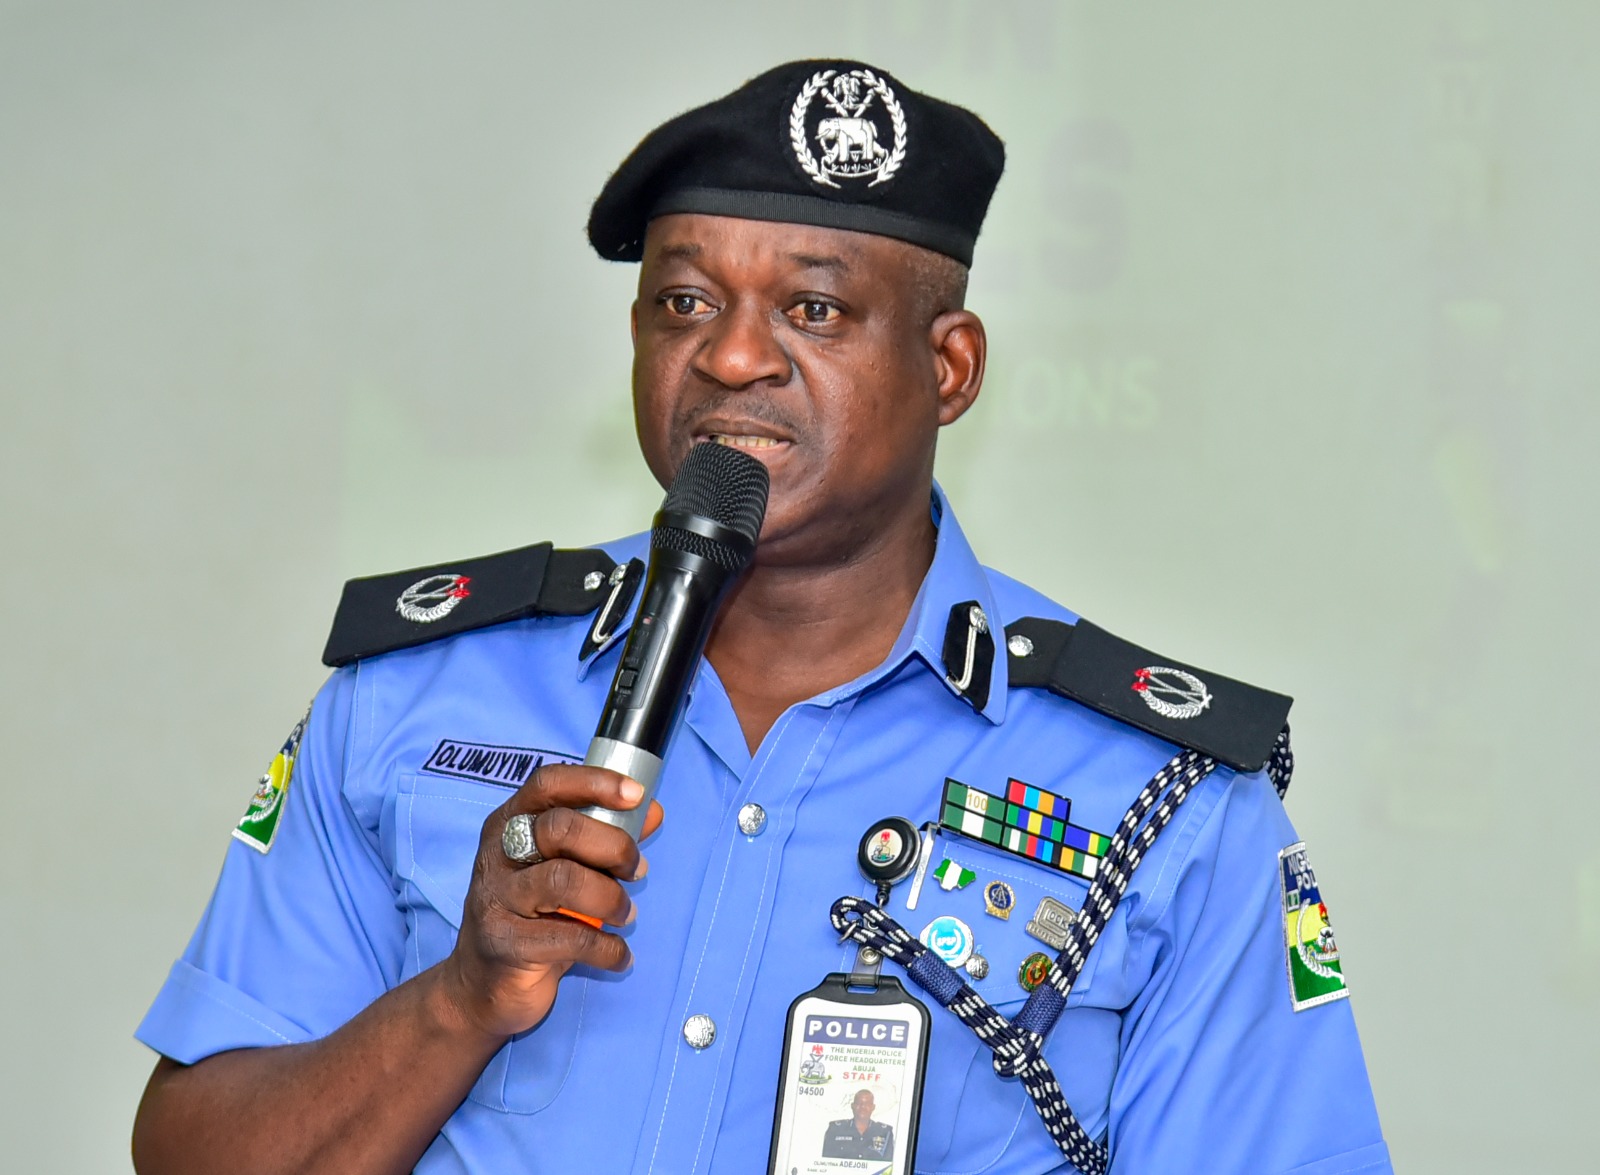 Don’t say what you can’t defend, it could be criminal – Police spokesperson warns social media users who talk….